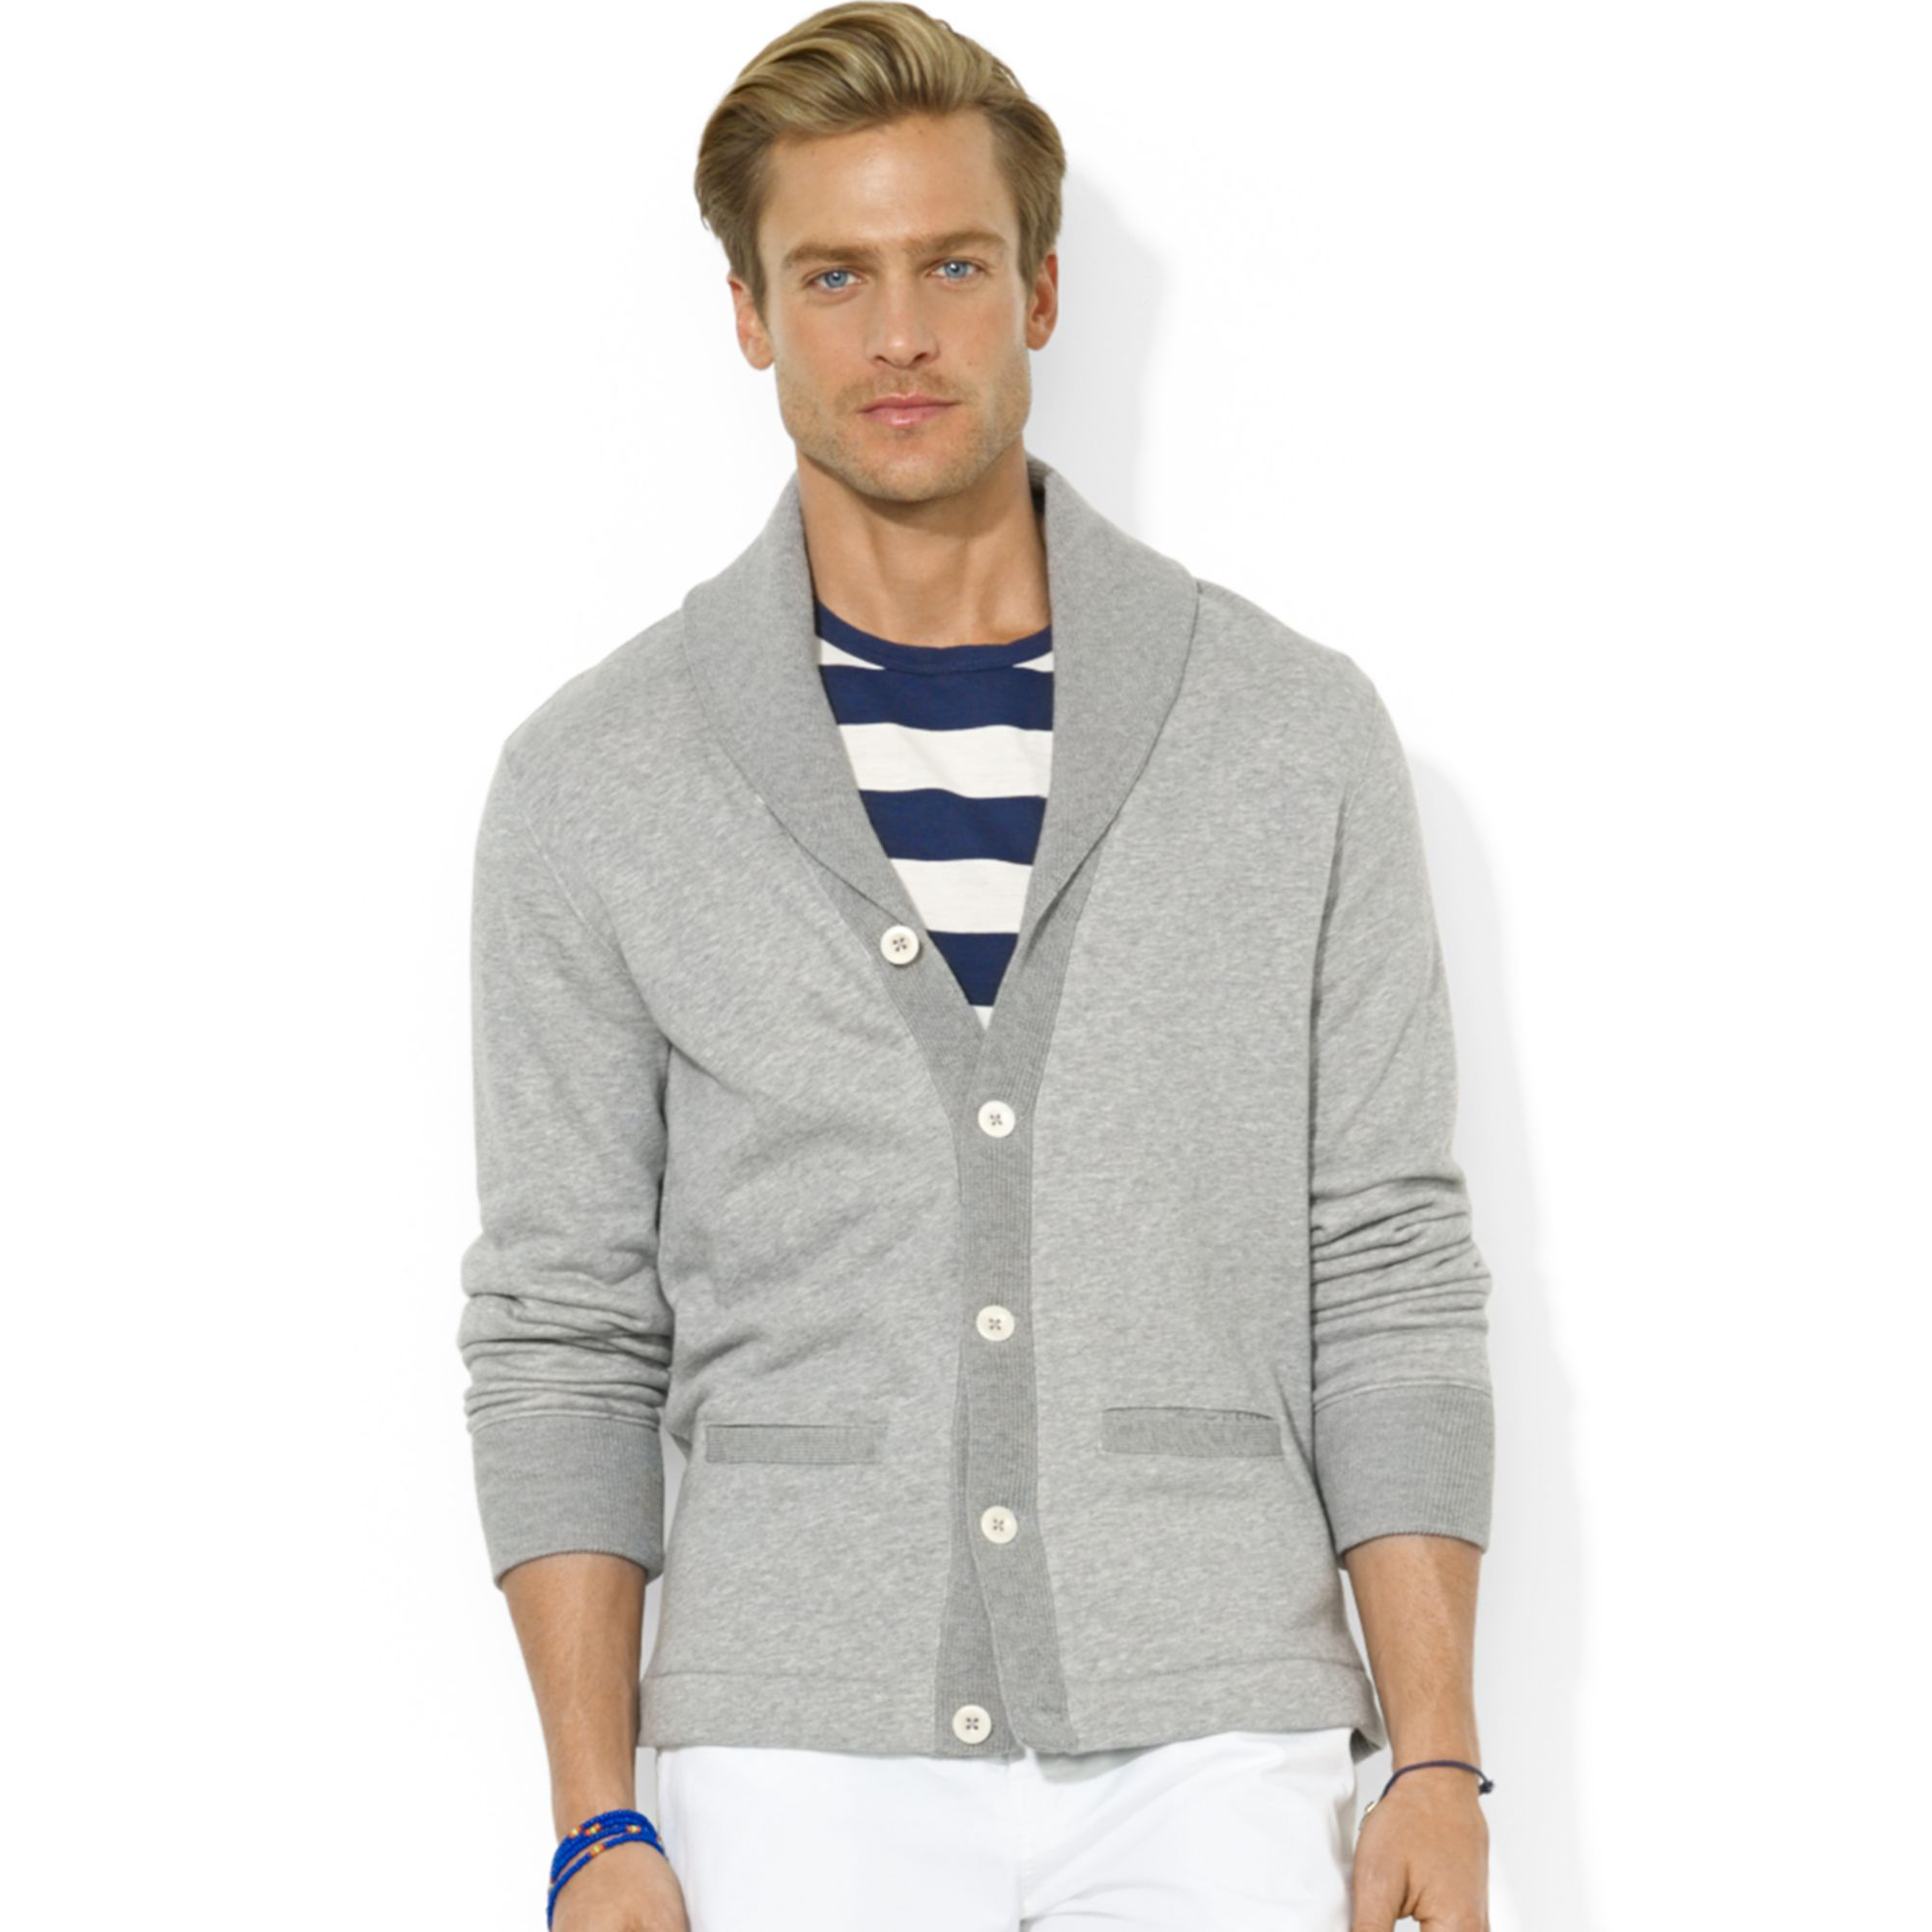 Lyst - Ralph Lauren Polo Terry Shawl Cardigan in Gray for Men